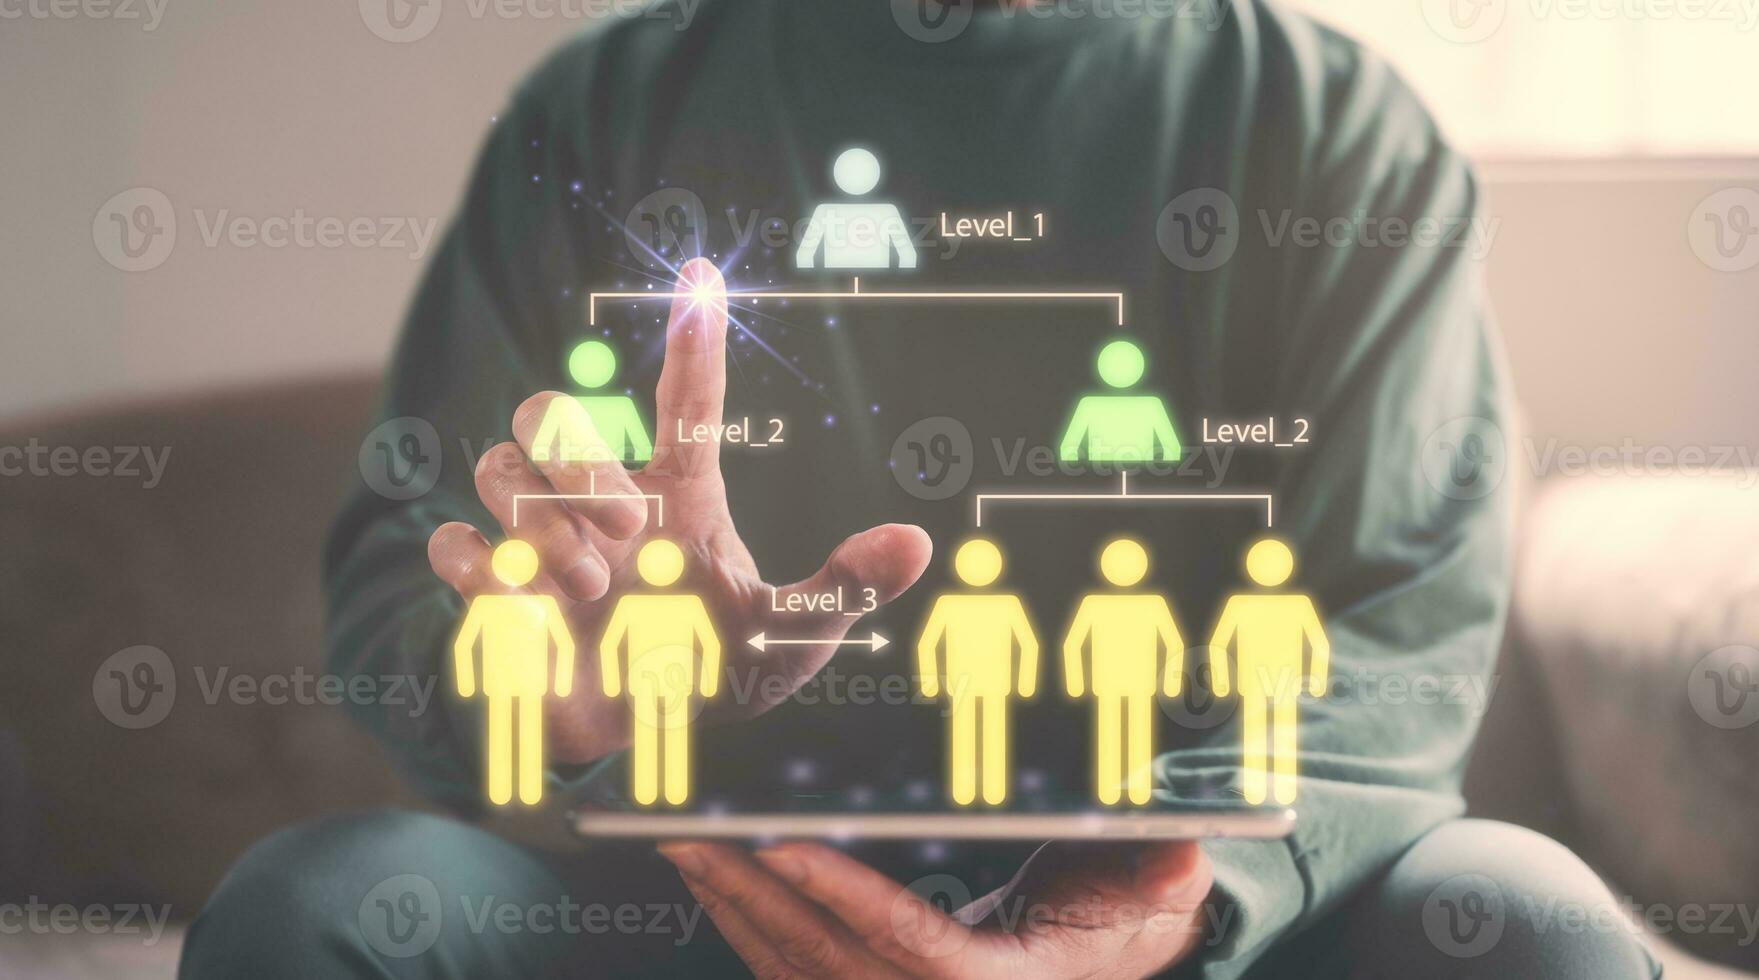 Human resource management and recruitment employment business concept, teamwork power, man holding tablet show diagram teamwork is power in organisation to success in business goals, working together photo